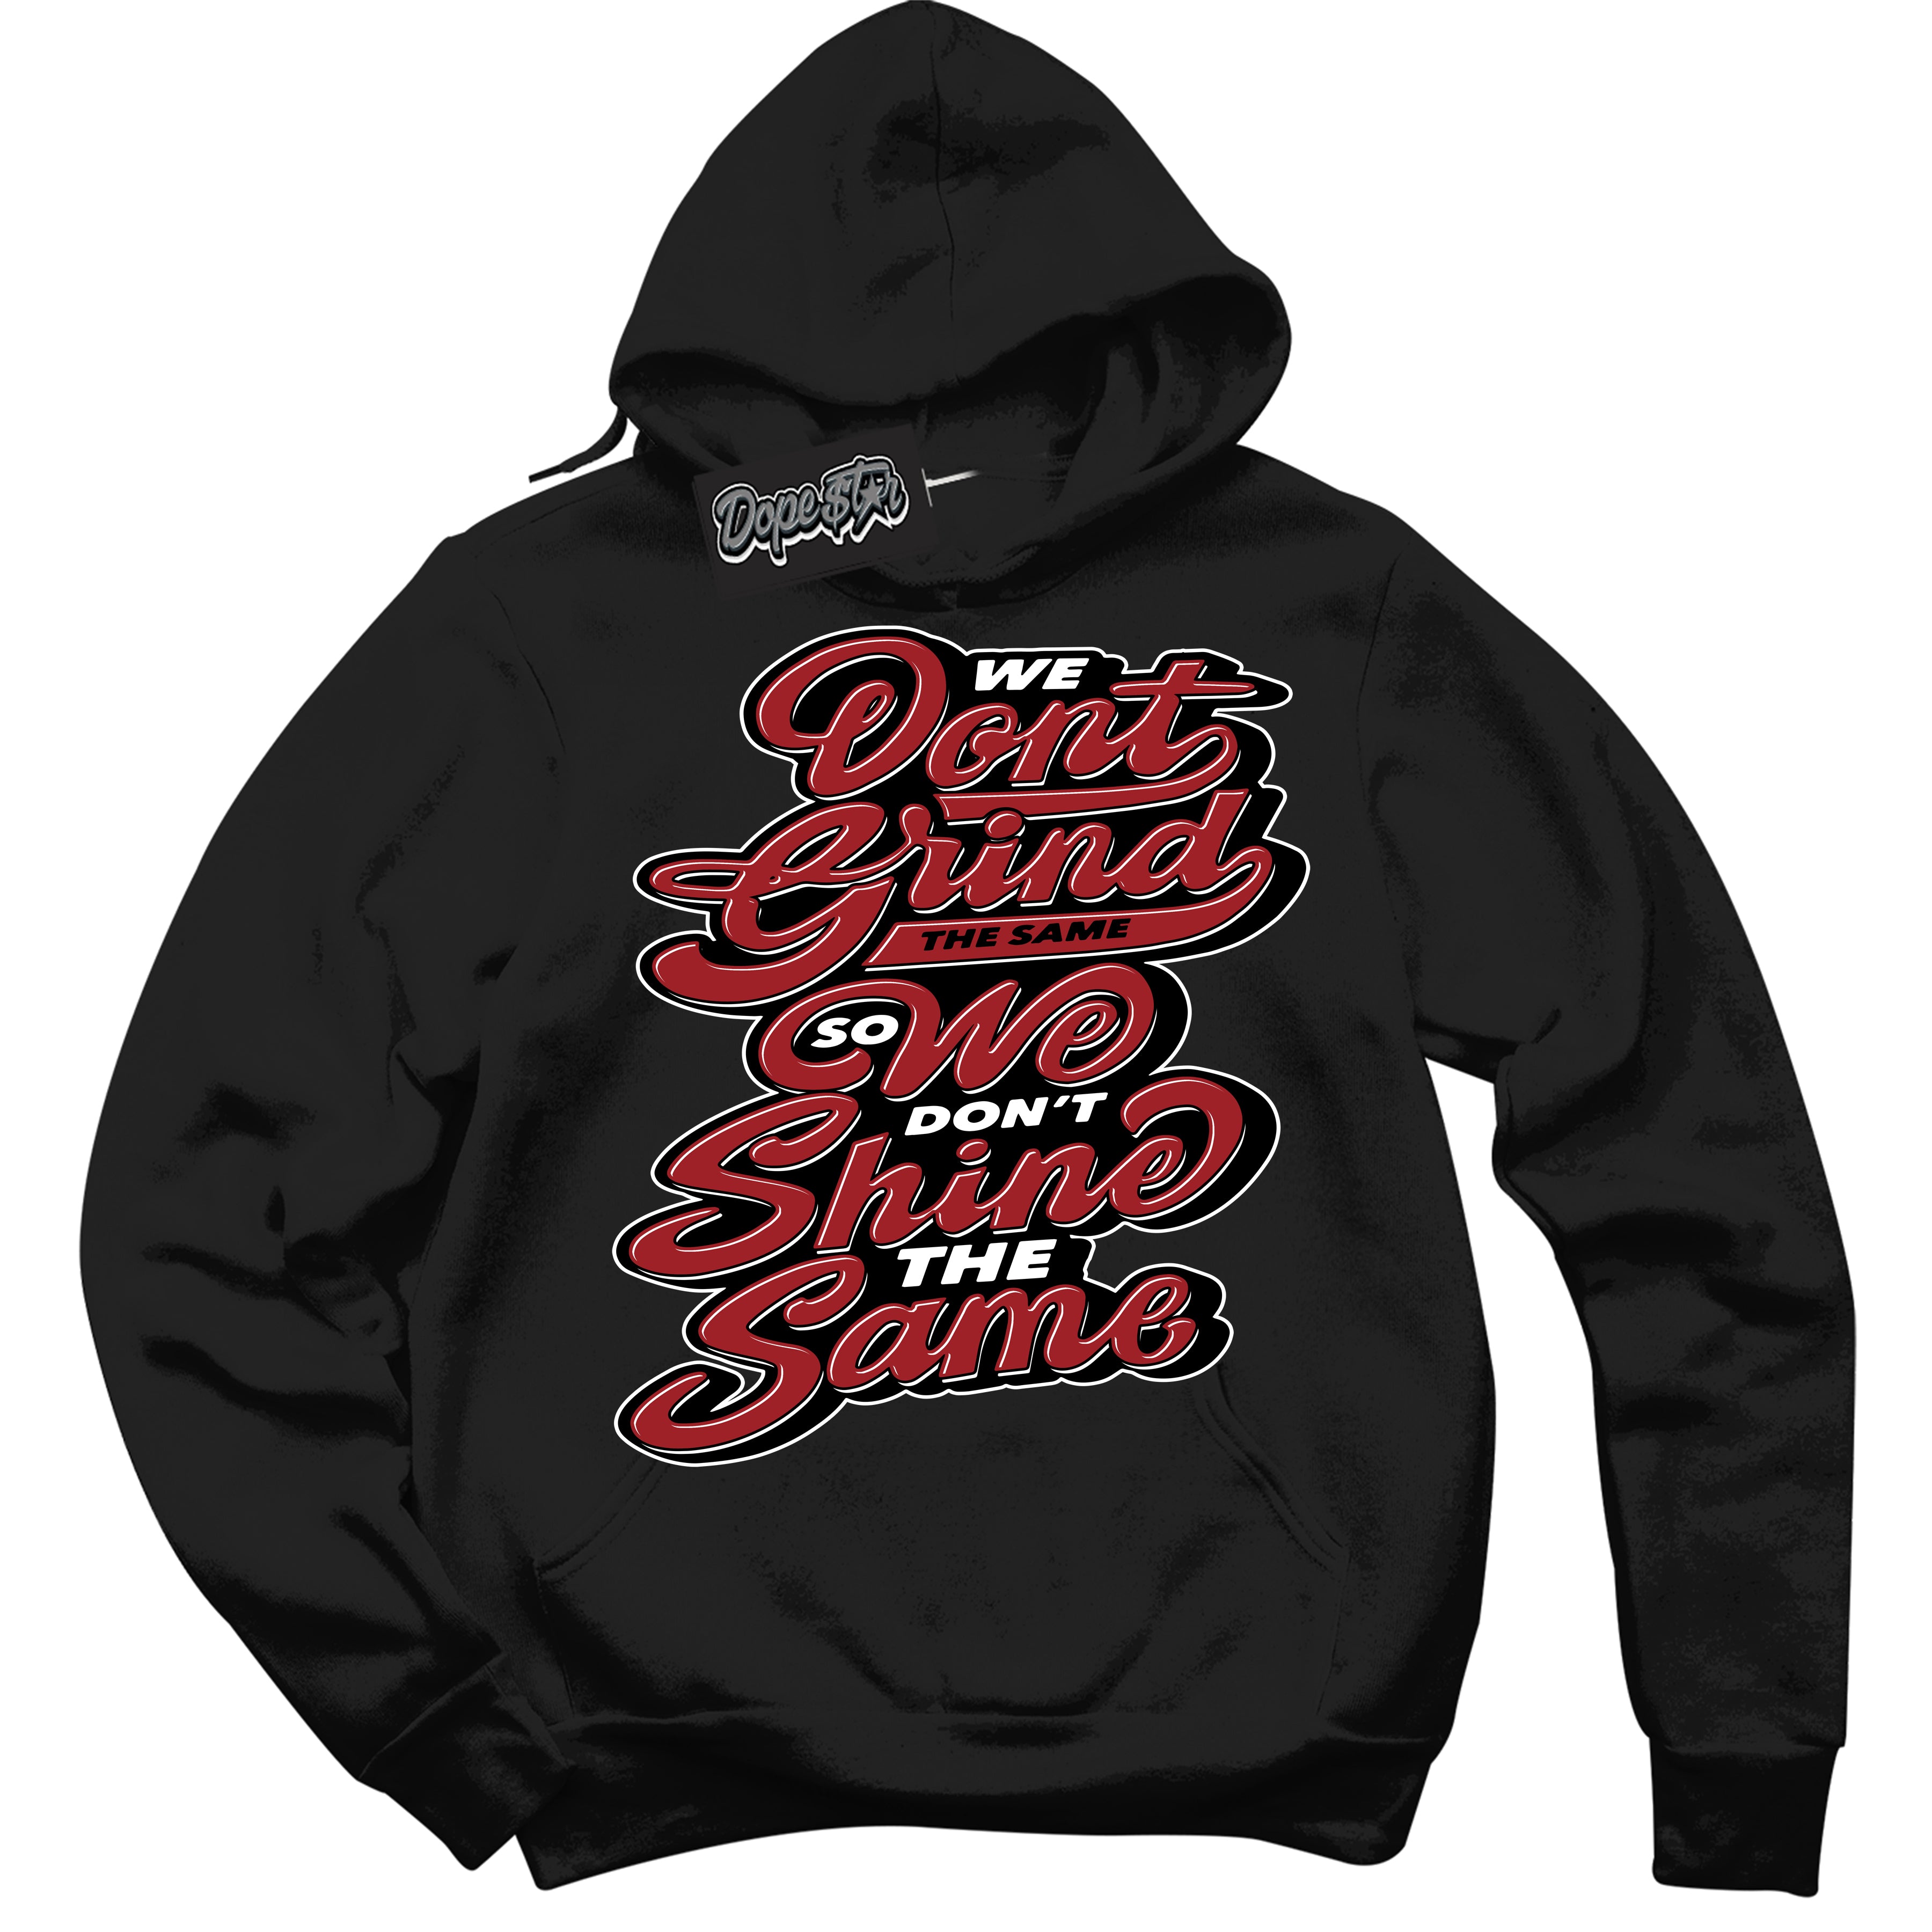 Cool Black Hoodie With “ Grind Shine “ Design That Perfectly Matches Lost And Found 1s Sneakers